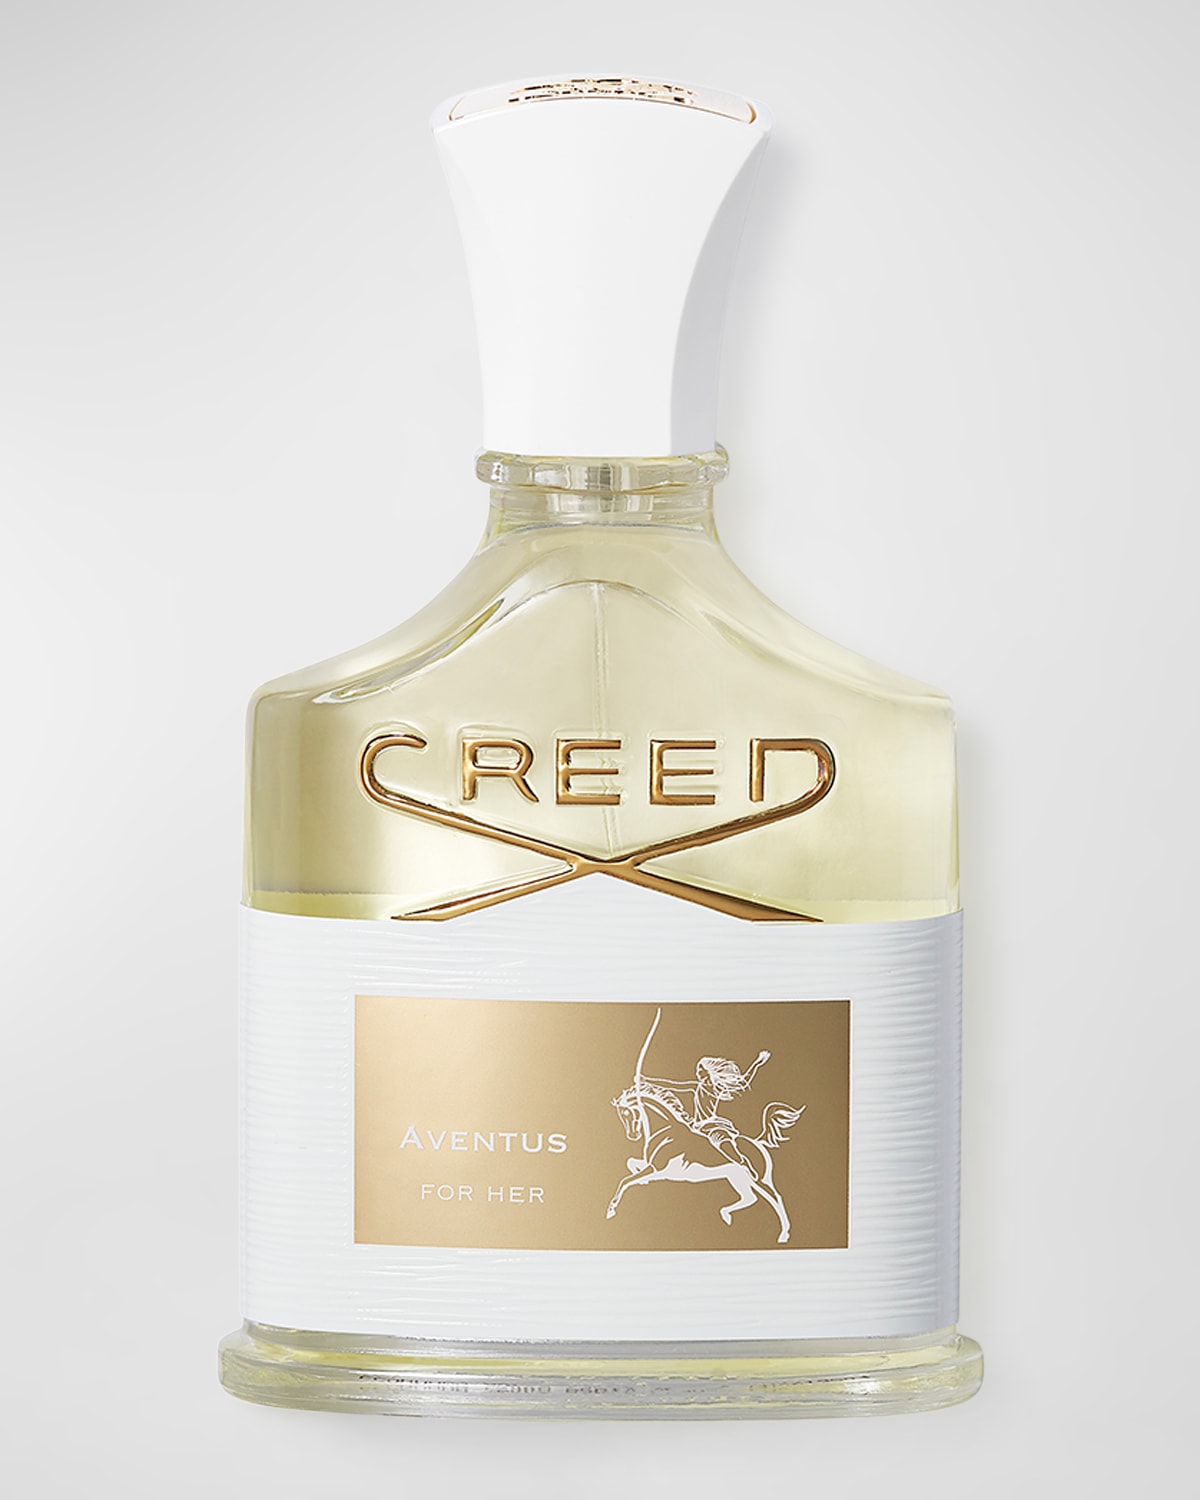 Creed Aventus for Her, 2.5 oz./ 75 mL